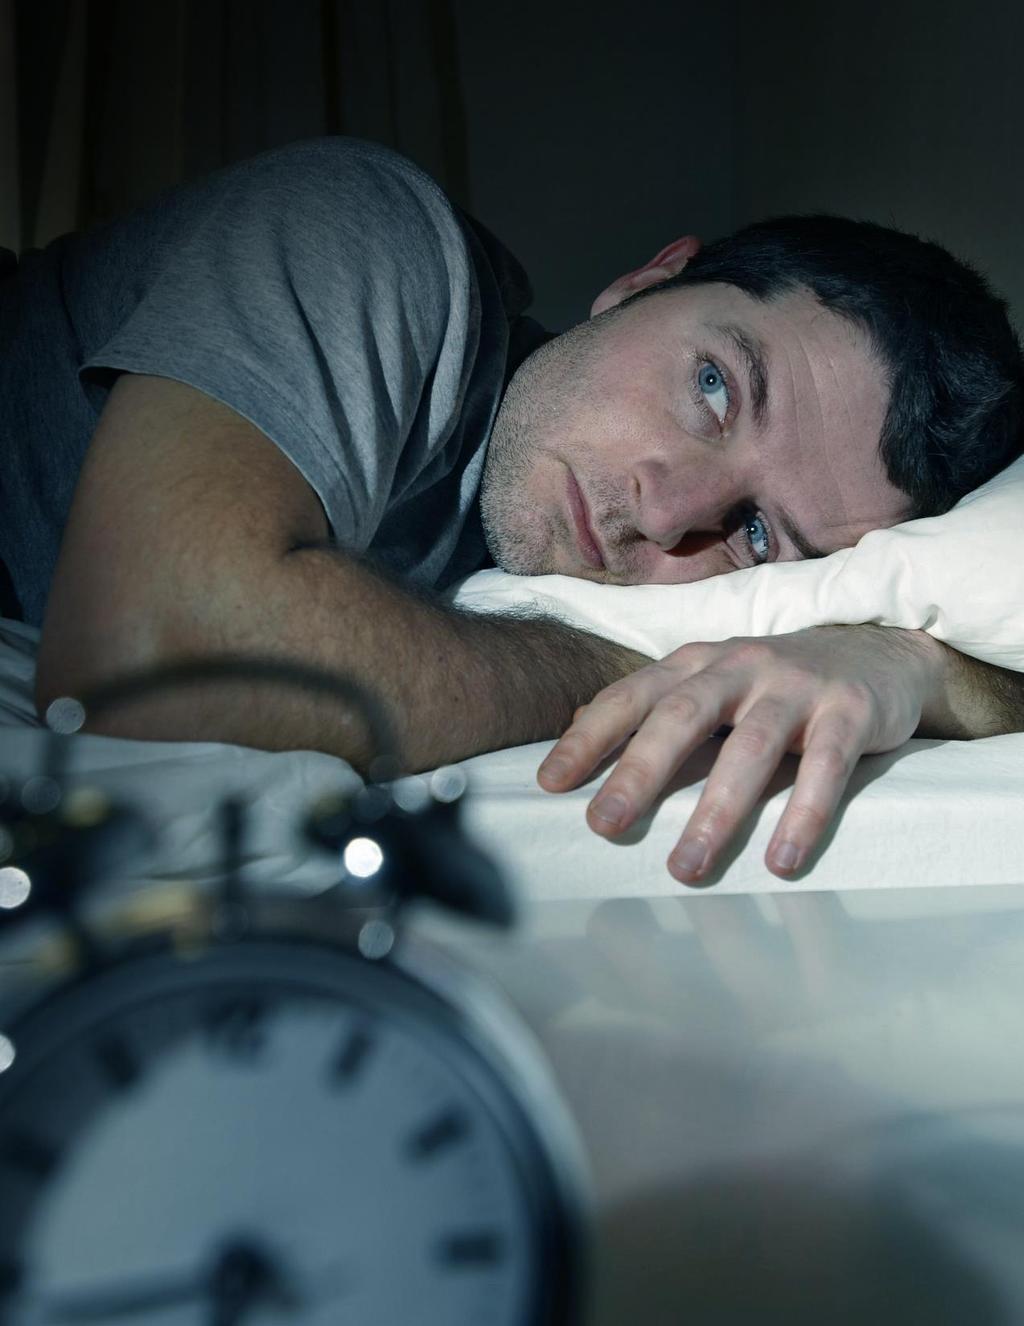 Signs That Sleep Disruption Is Caused By Stress 1) Difficulty falling off to sleep because of 'mind